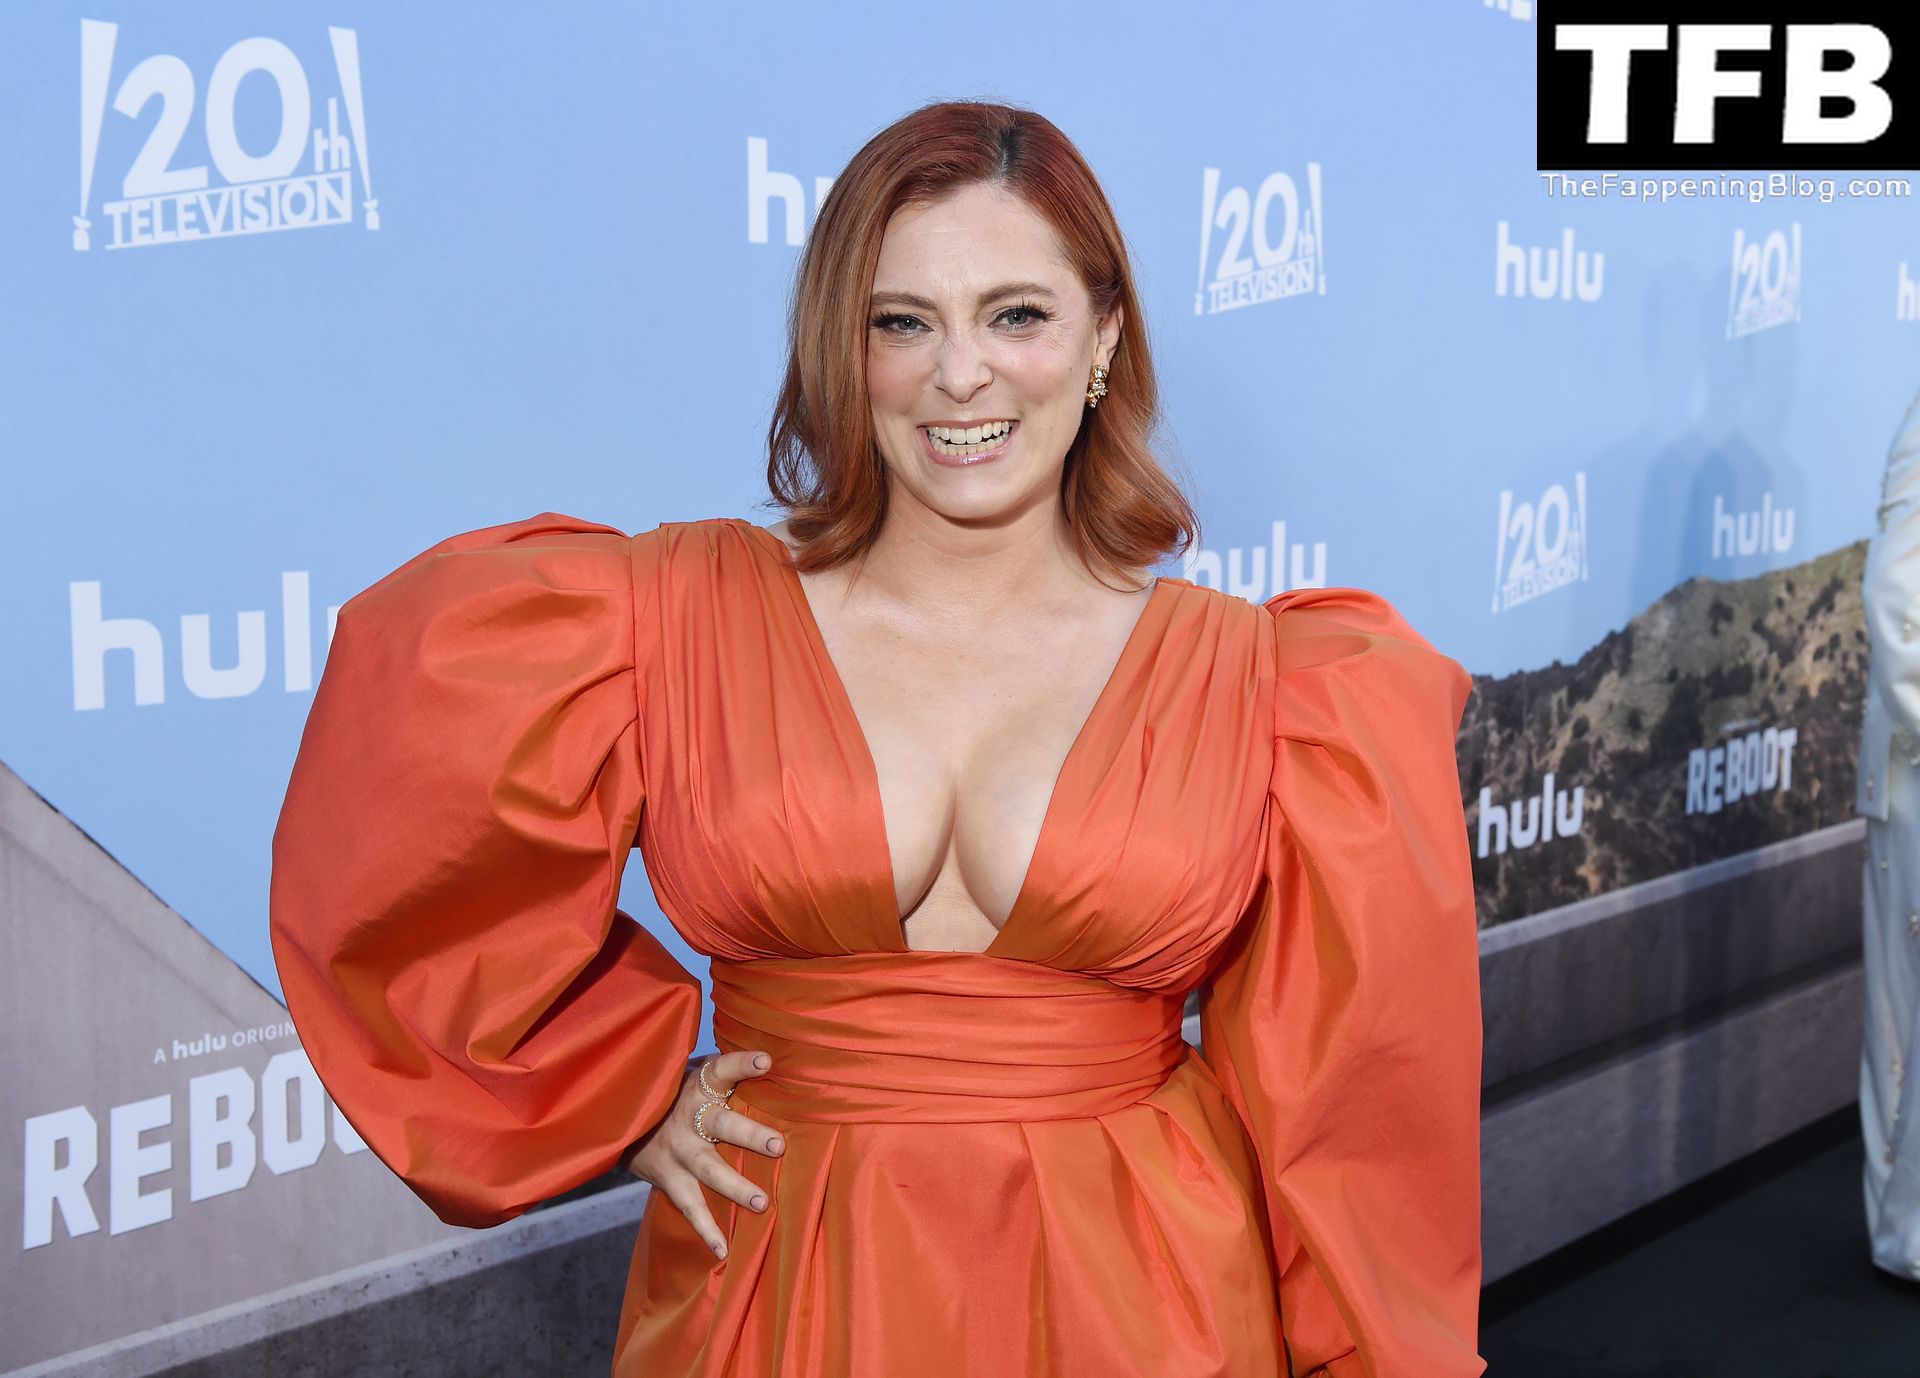 Rachel Bloom Sexy The Fappening Blog 23 - Rachel Bloom Displays Her Sexy Tits at the “Reboot” Premiere in LA (33 Photos)